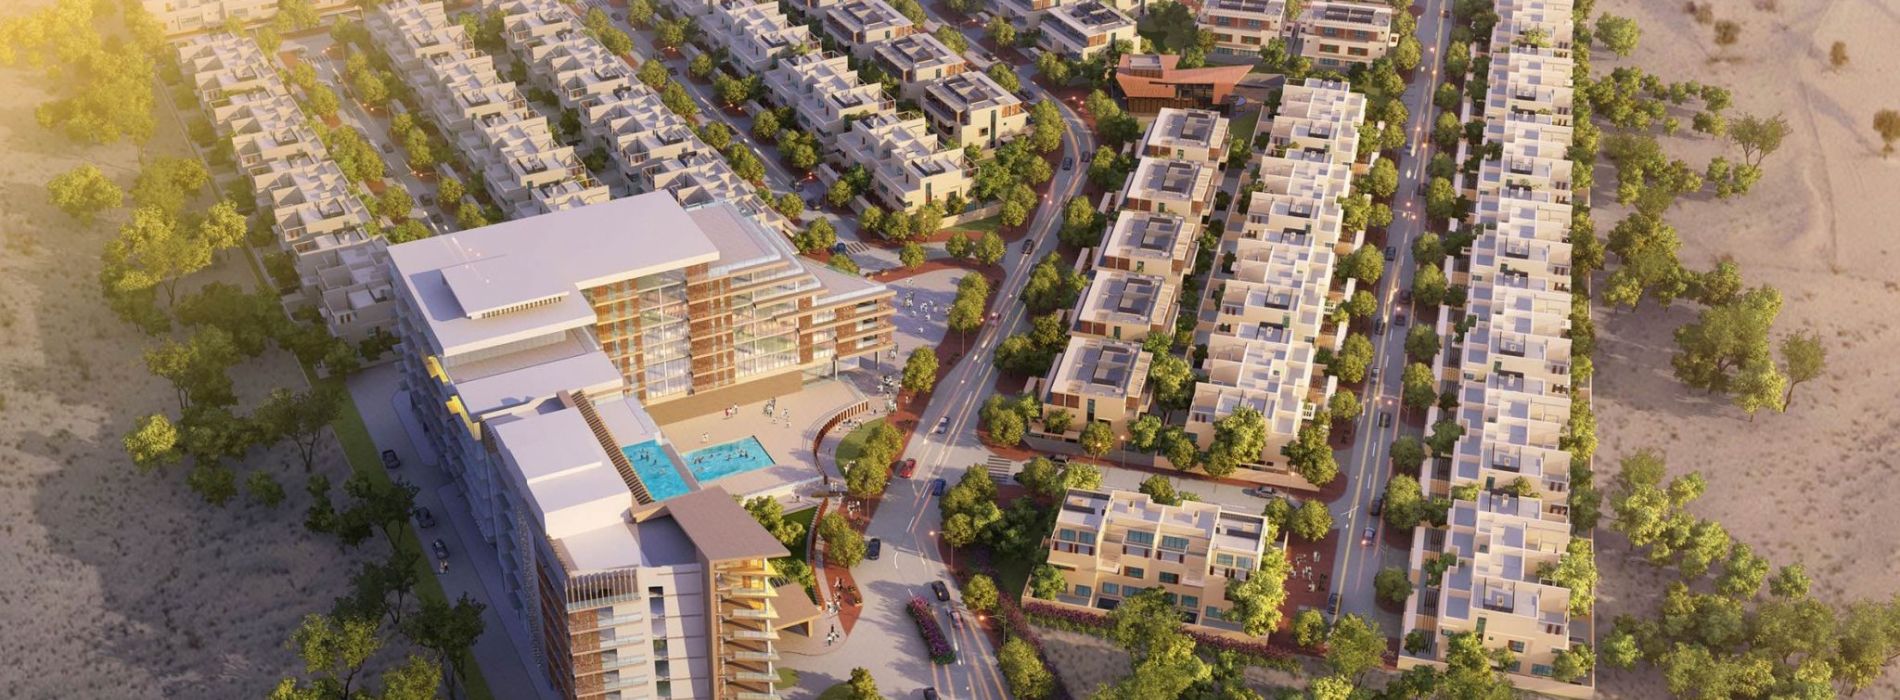 Everything you need to know about California Village and its developer.